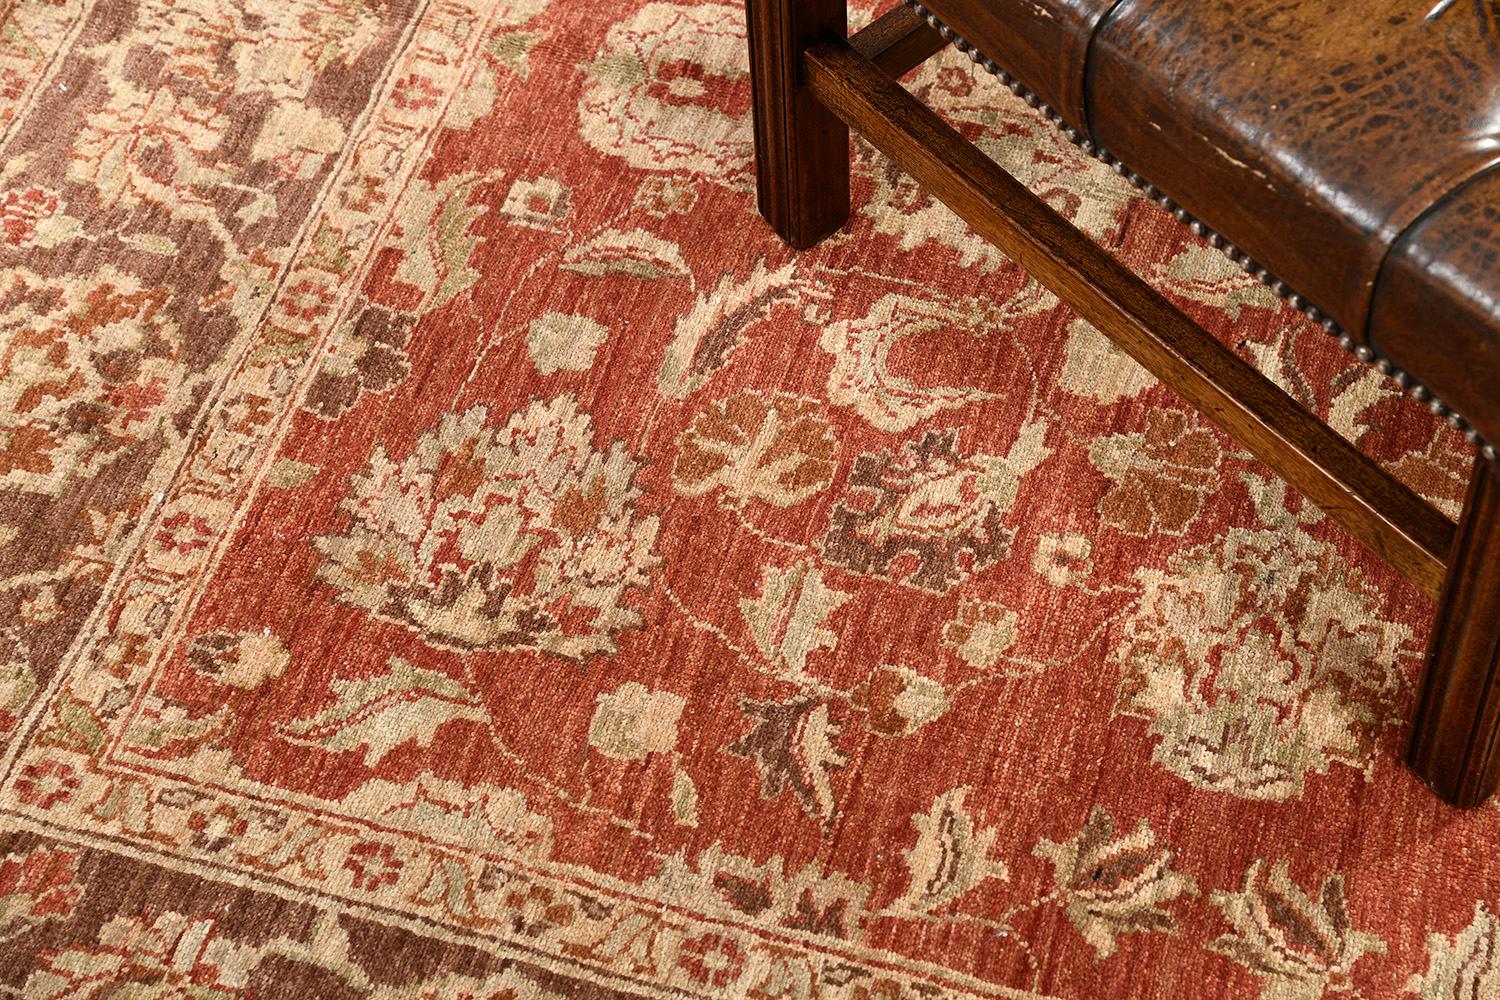 Series of symbolic motifs and ornaments are reflected through neutral tones of embellishments to telling a historical event in the vibrant red field. The borders are beautifully hand-woven that created from a vegetable dye to form an elegant Persian